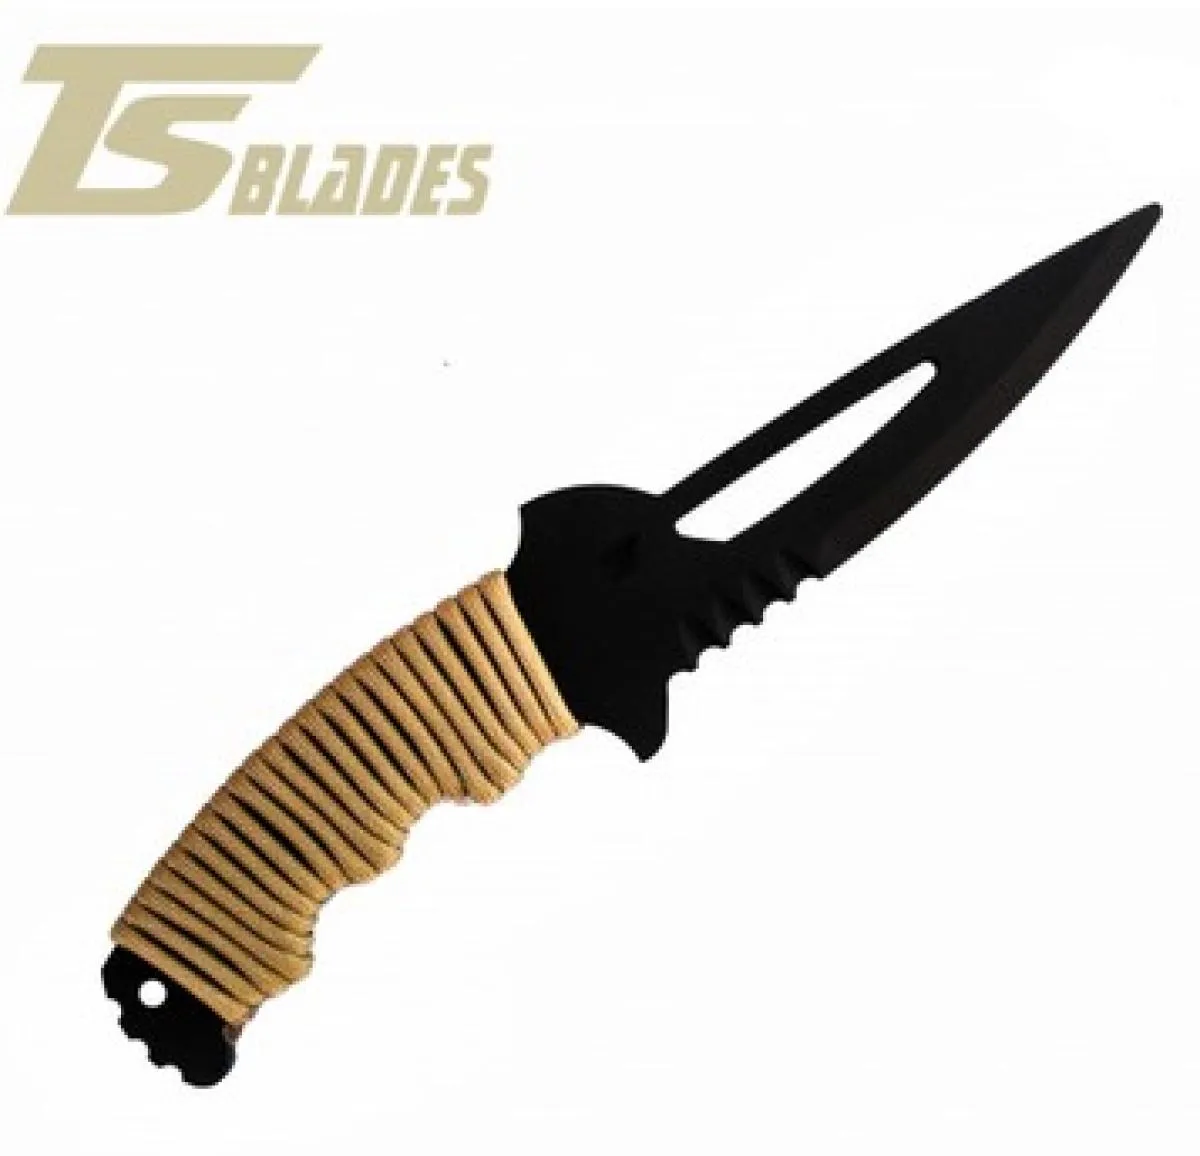 TS BLADES COYOTE TAN PARACORD DUMMY KNIFE